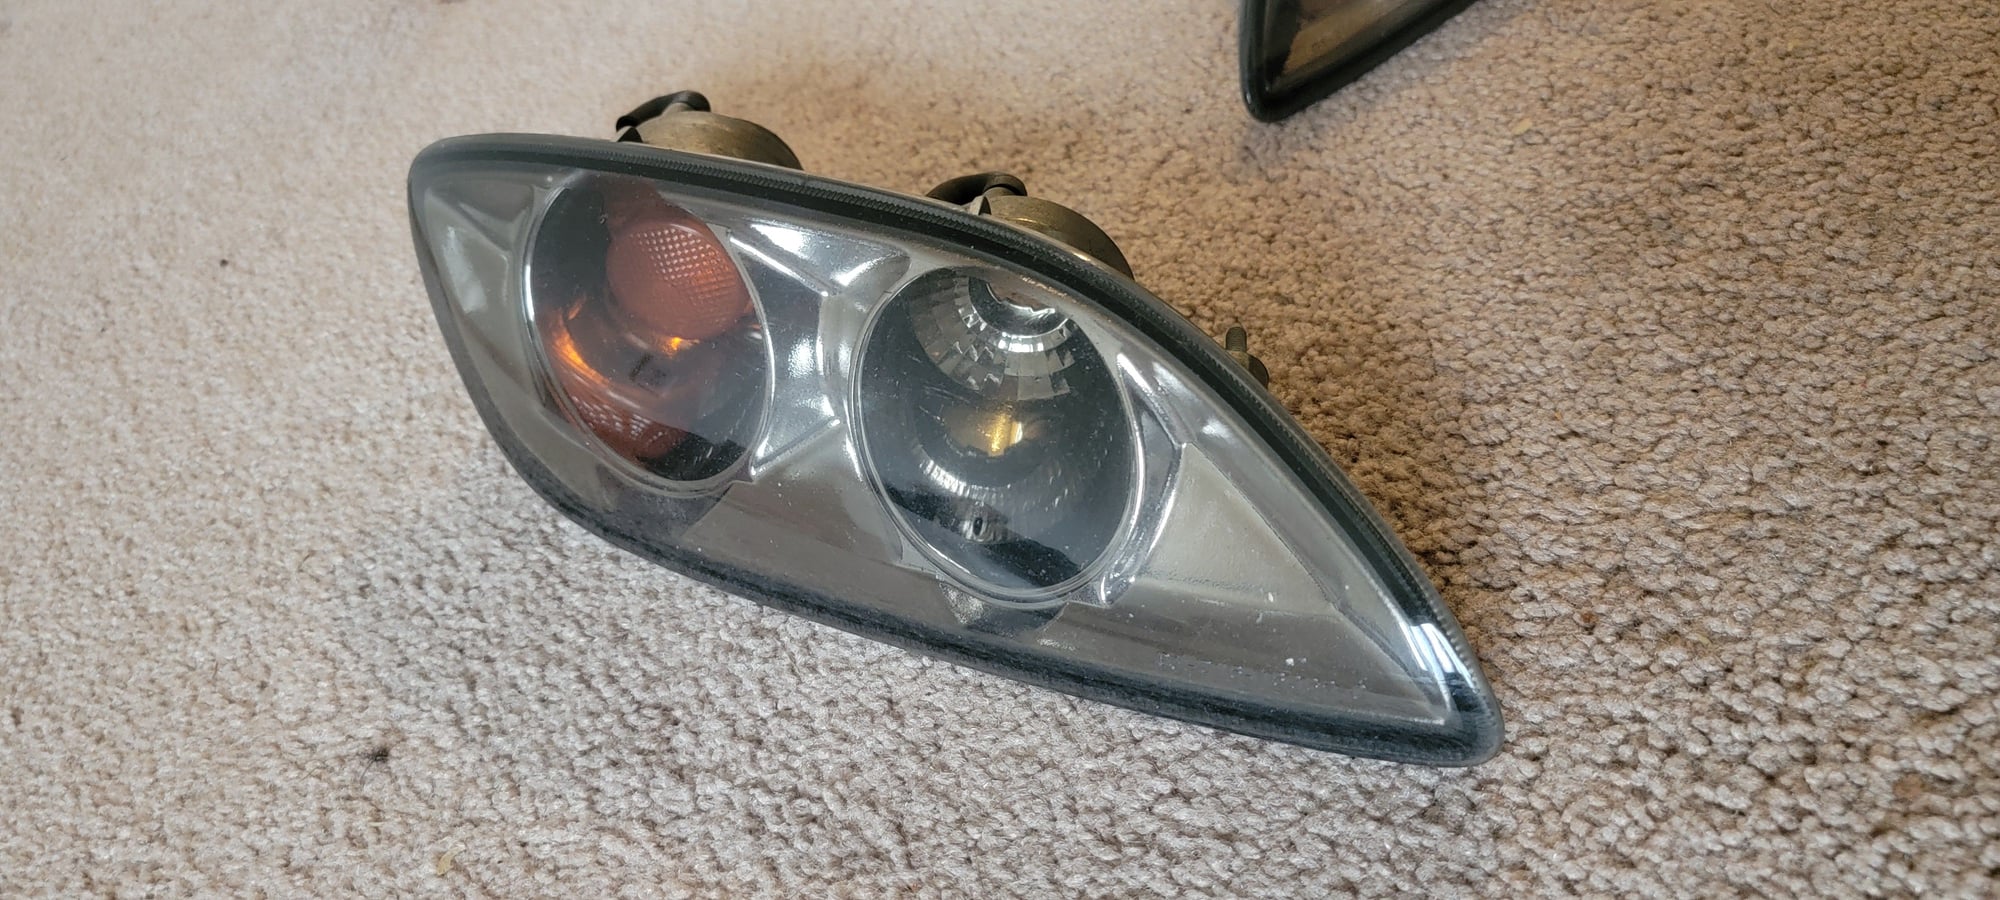 Exterior Body Parts - FD aftermarket turn signal lights - Used - 1993 to 2001 Mazda RX-7 - Portland, OR 97216, United States